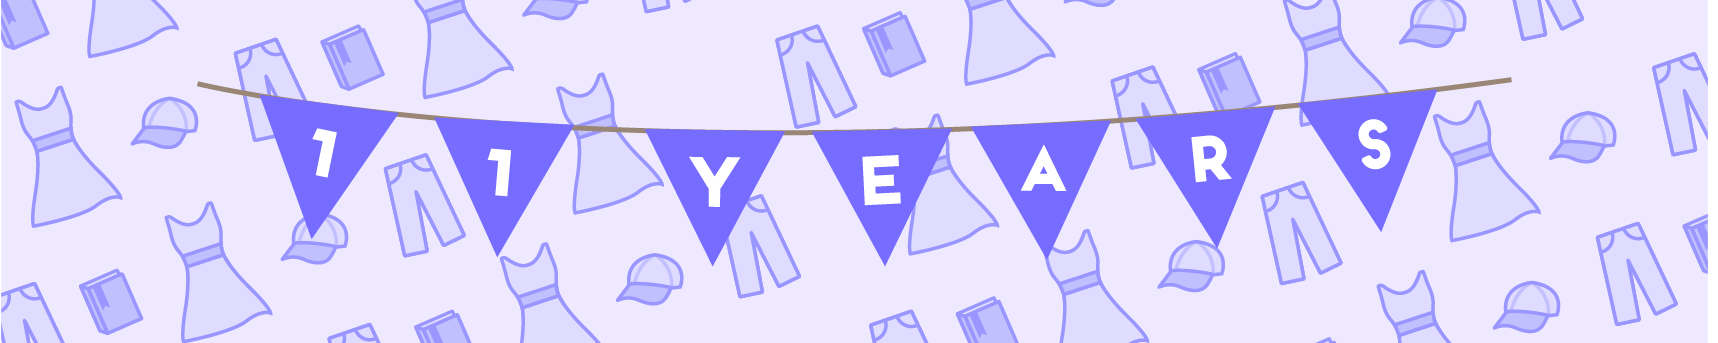 blog header image of party flags spelling 11 years